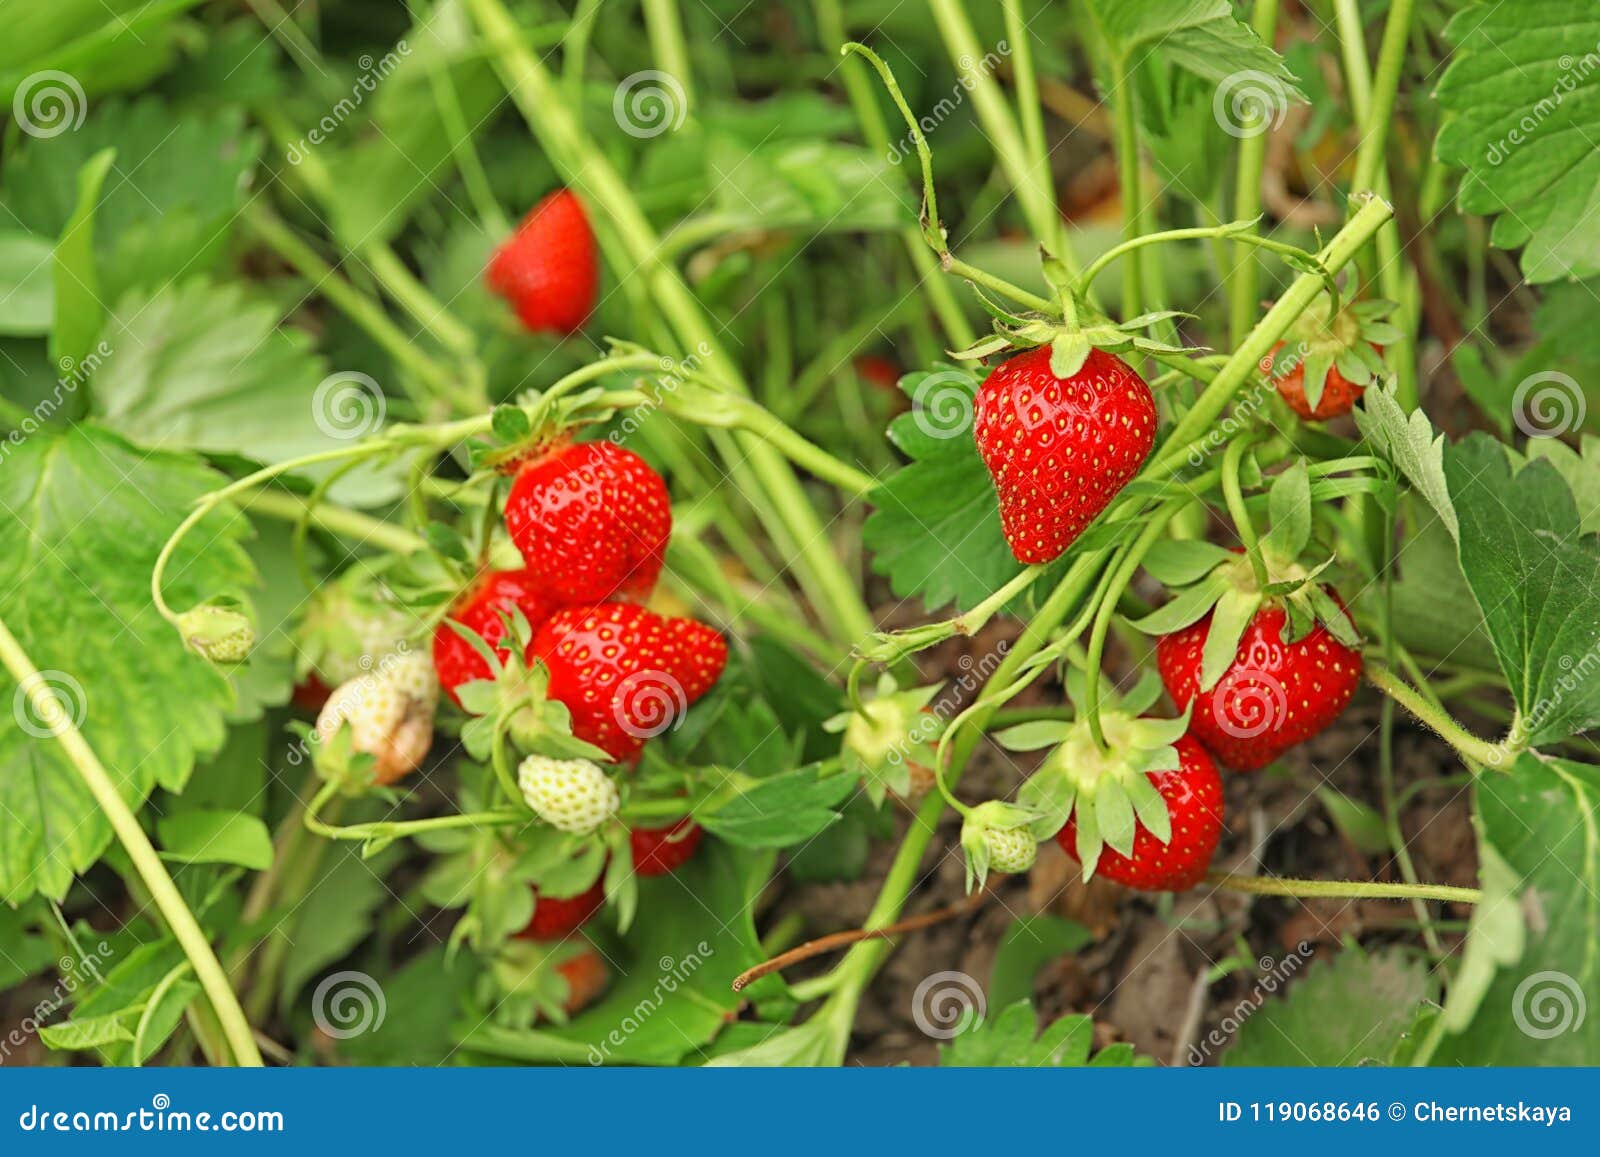 strawberry plant with ripening berries